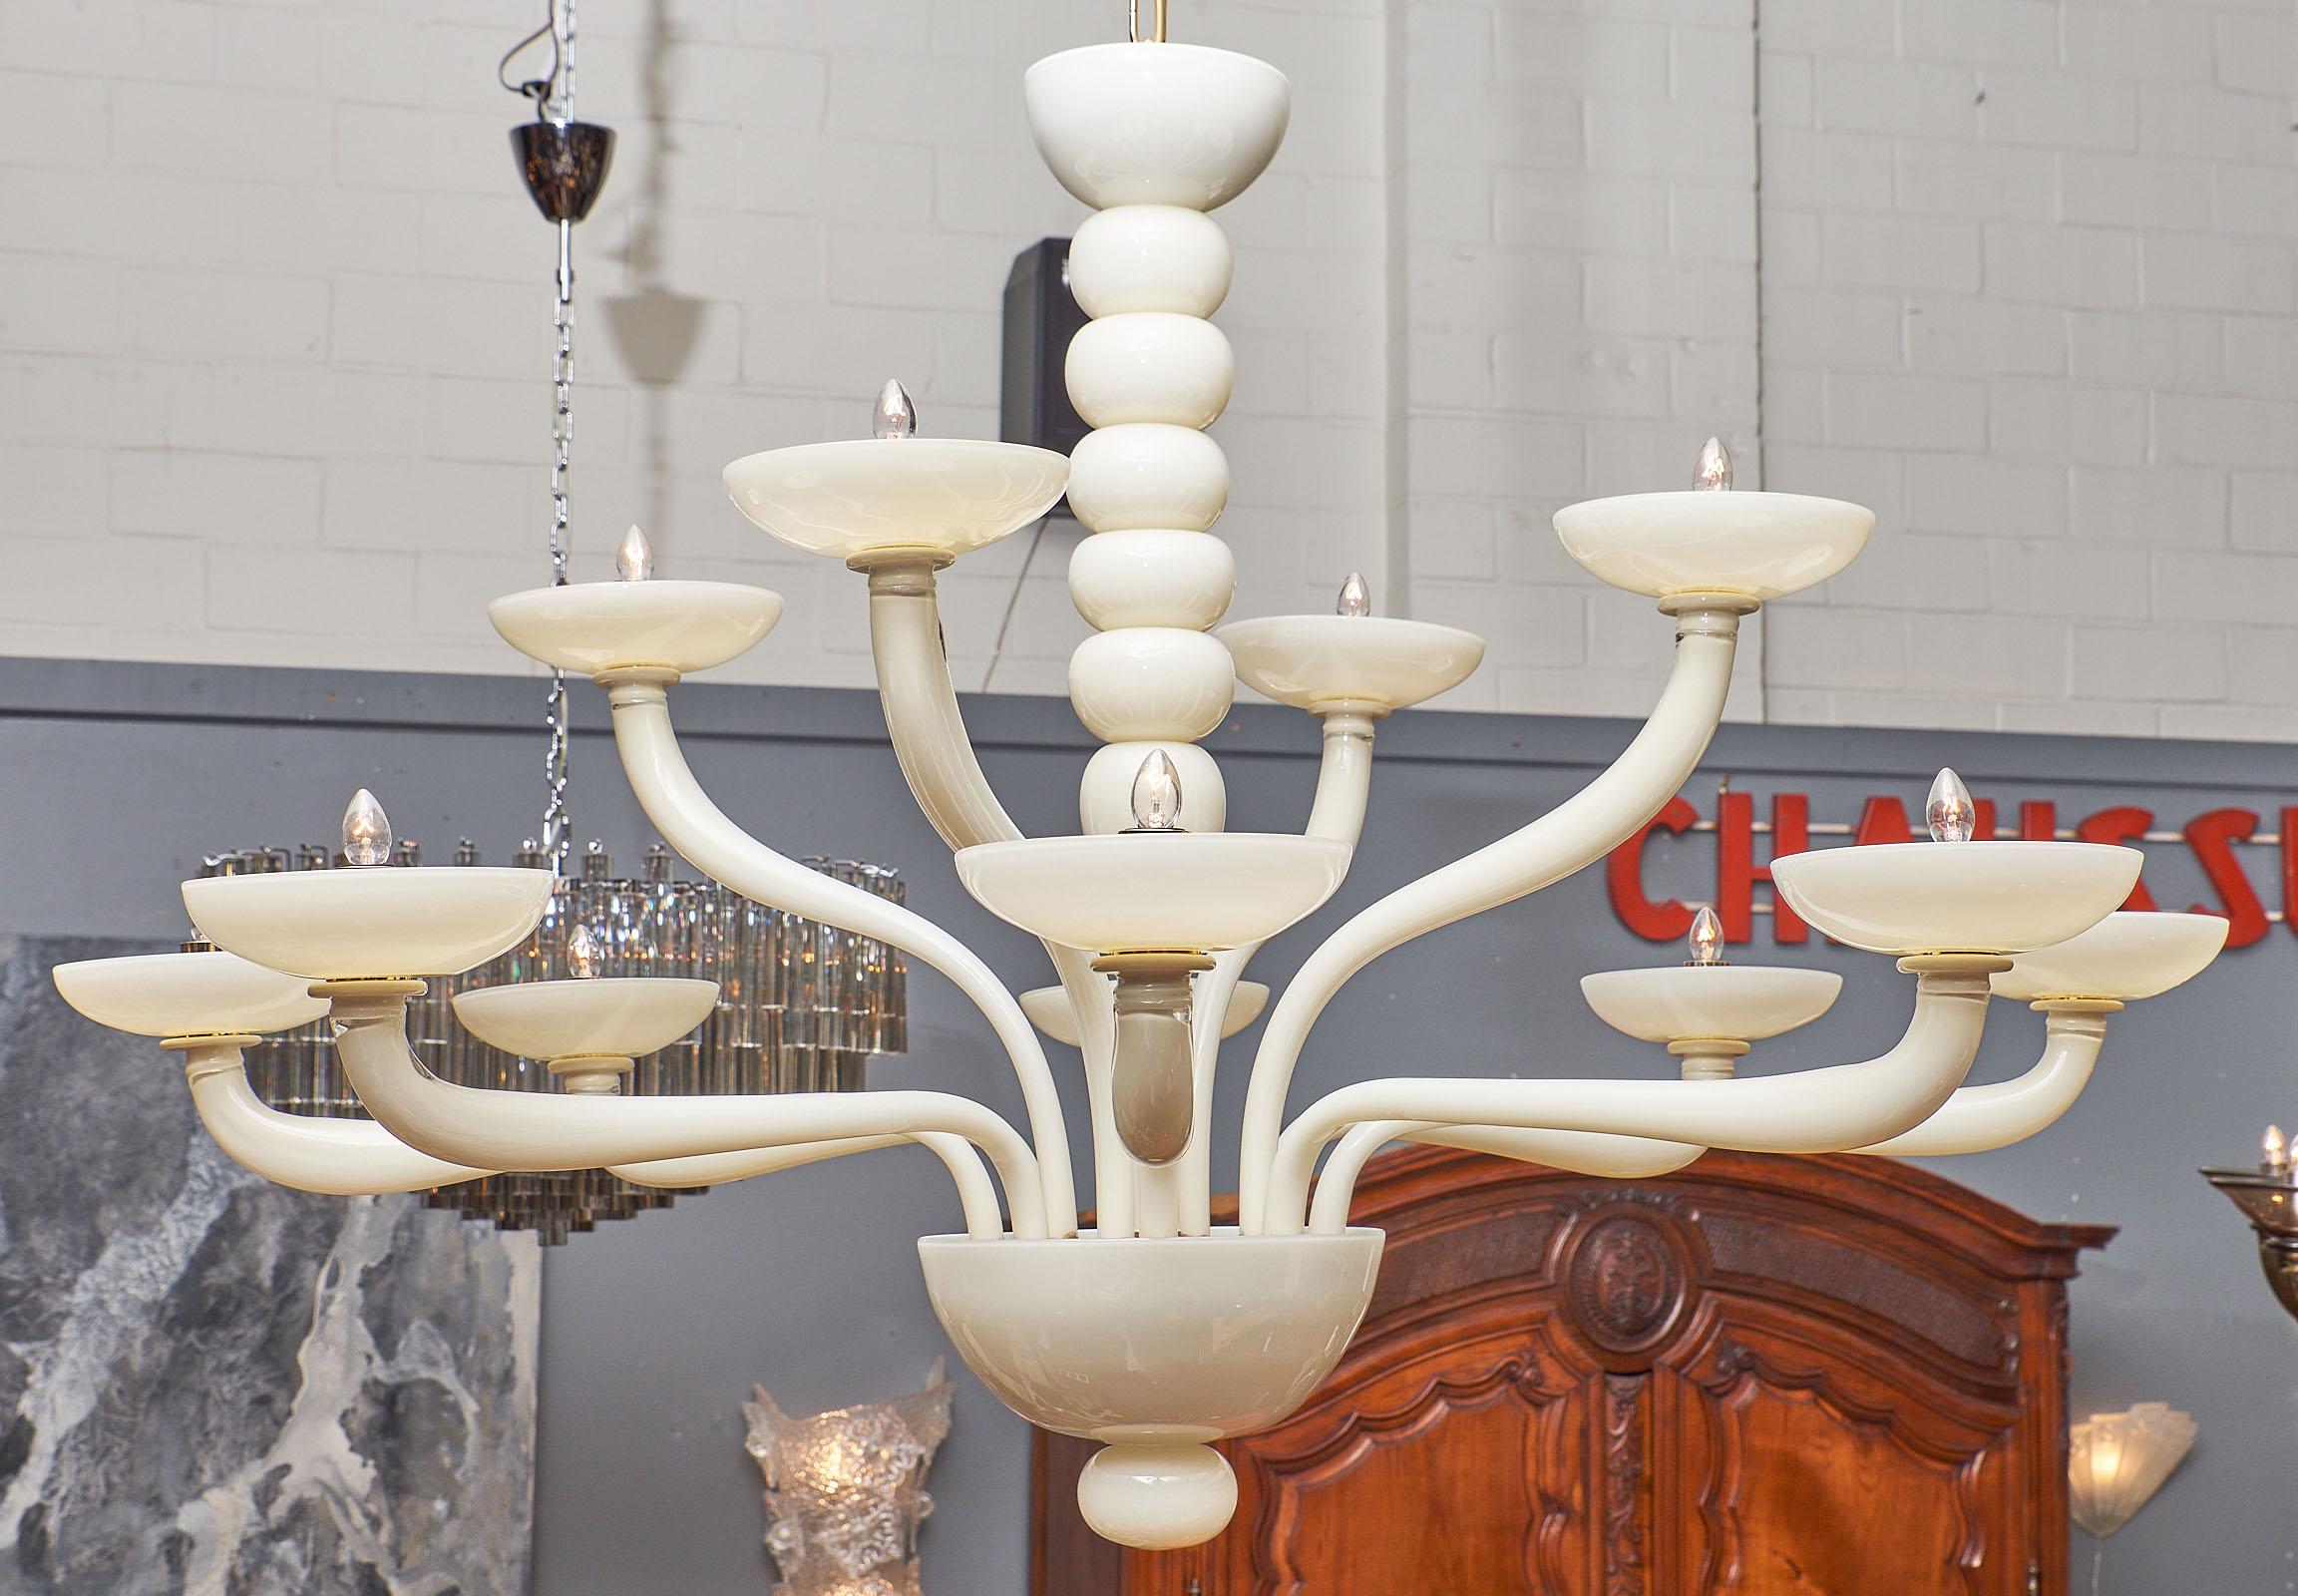 Ivory murano glass chandelier with twelve branches. We love the classic lines and modern details of this hand blown fixture. It has been newly wired to fit US standards and requires 12 candelabra base bulbs.

This piece is currently located at our